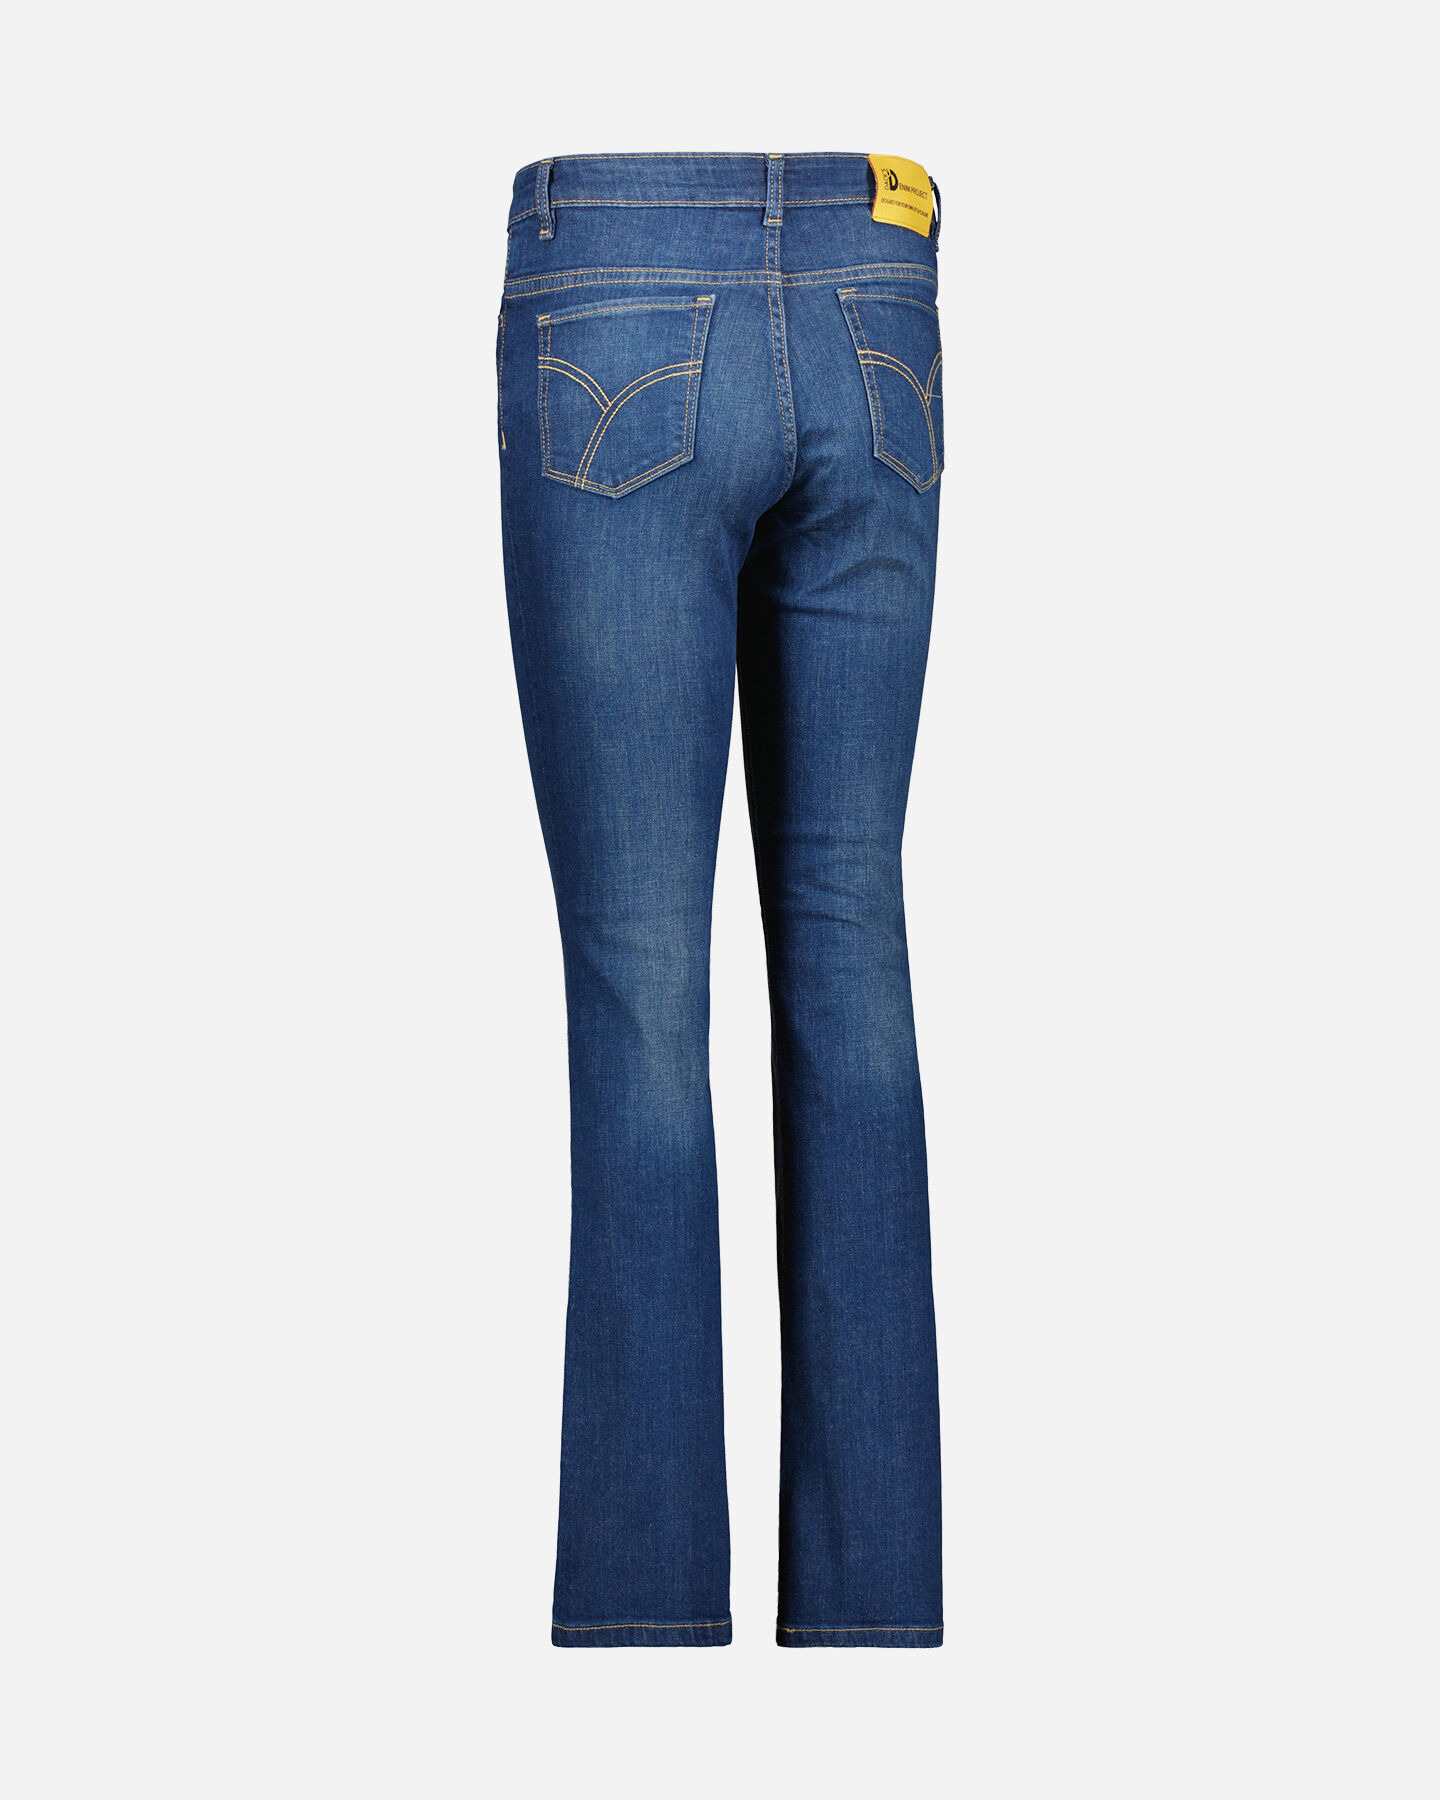  Jeans DACK'S CASUAL CITY W S4101455|MD|40 scatto 2